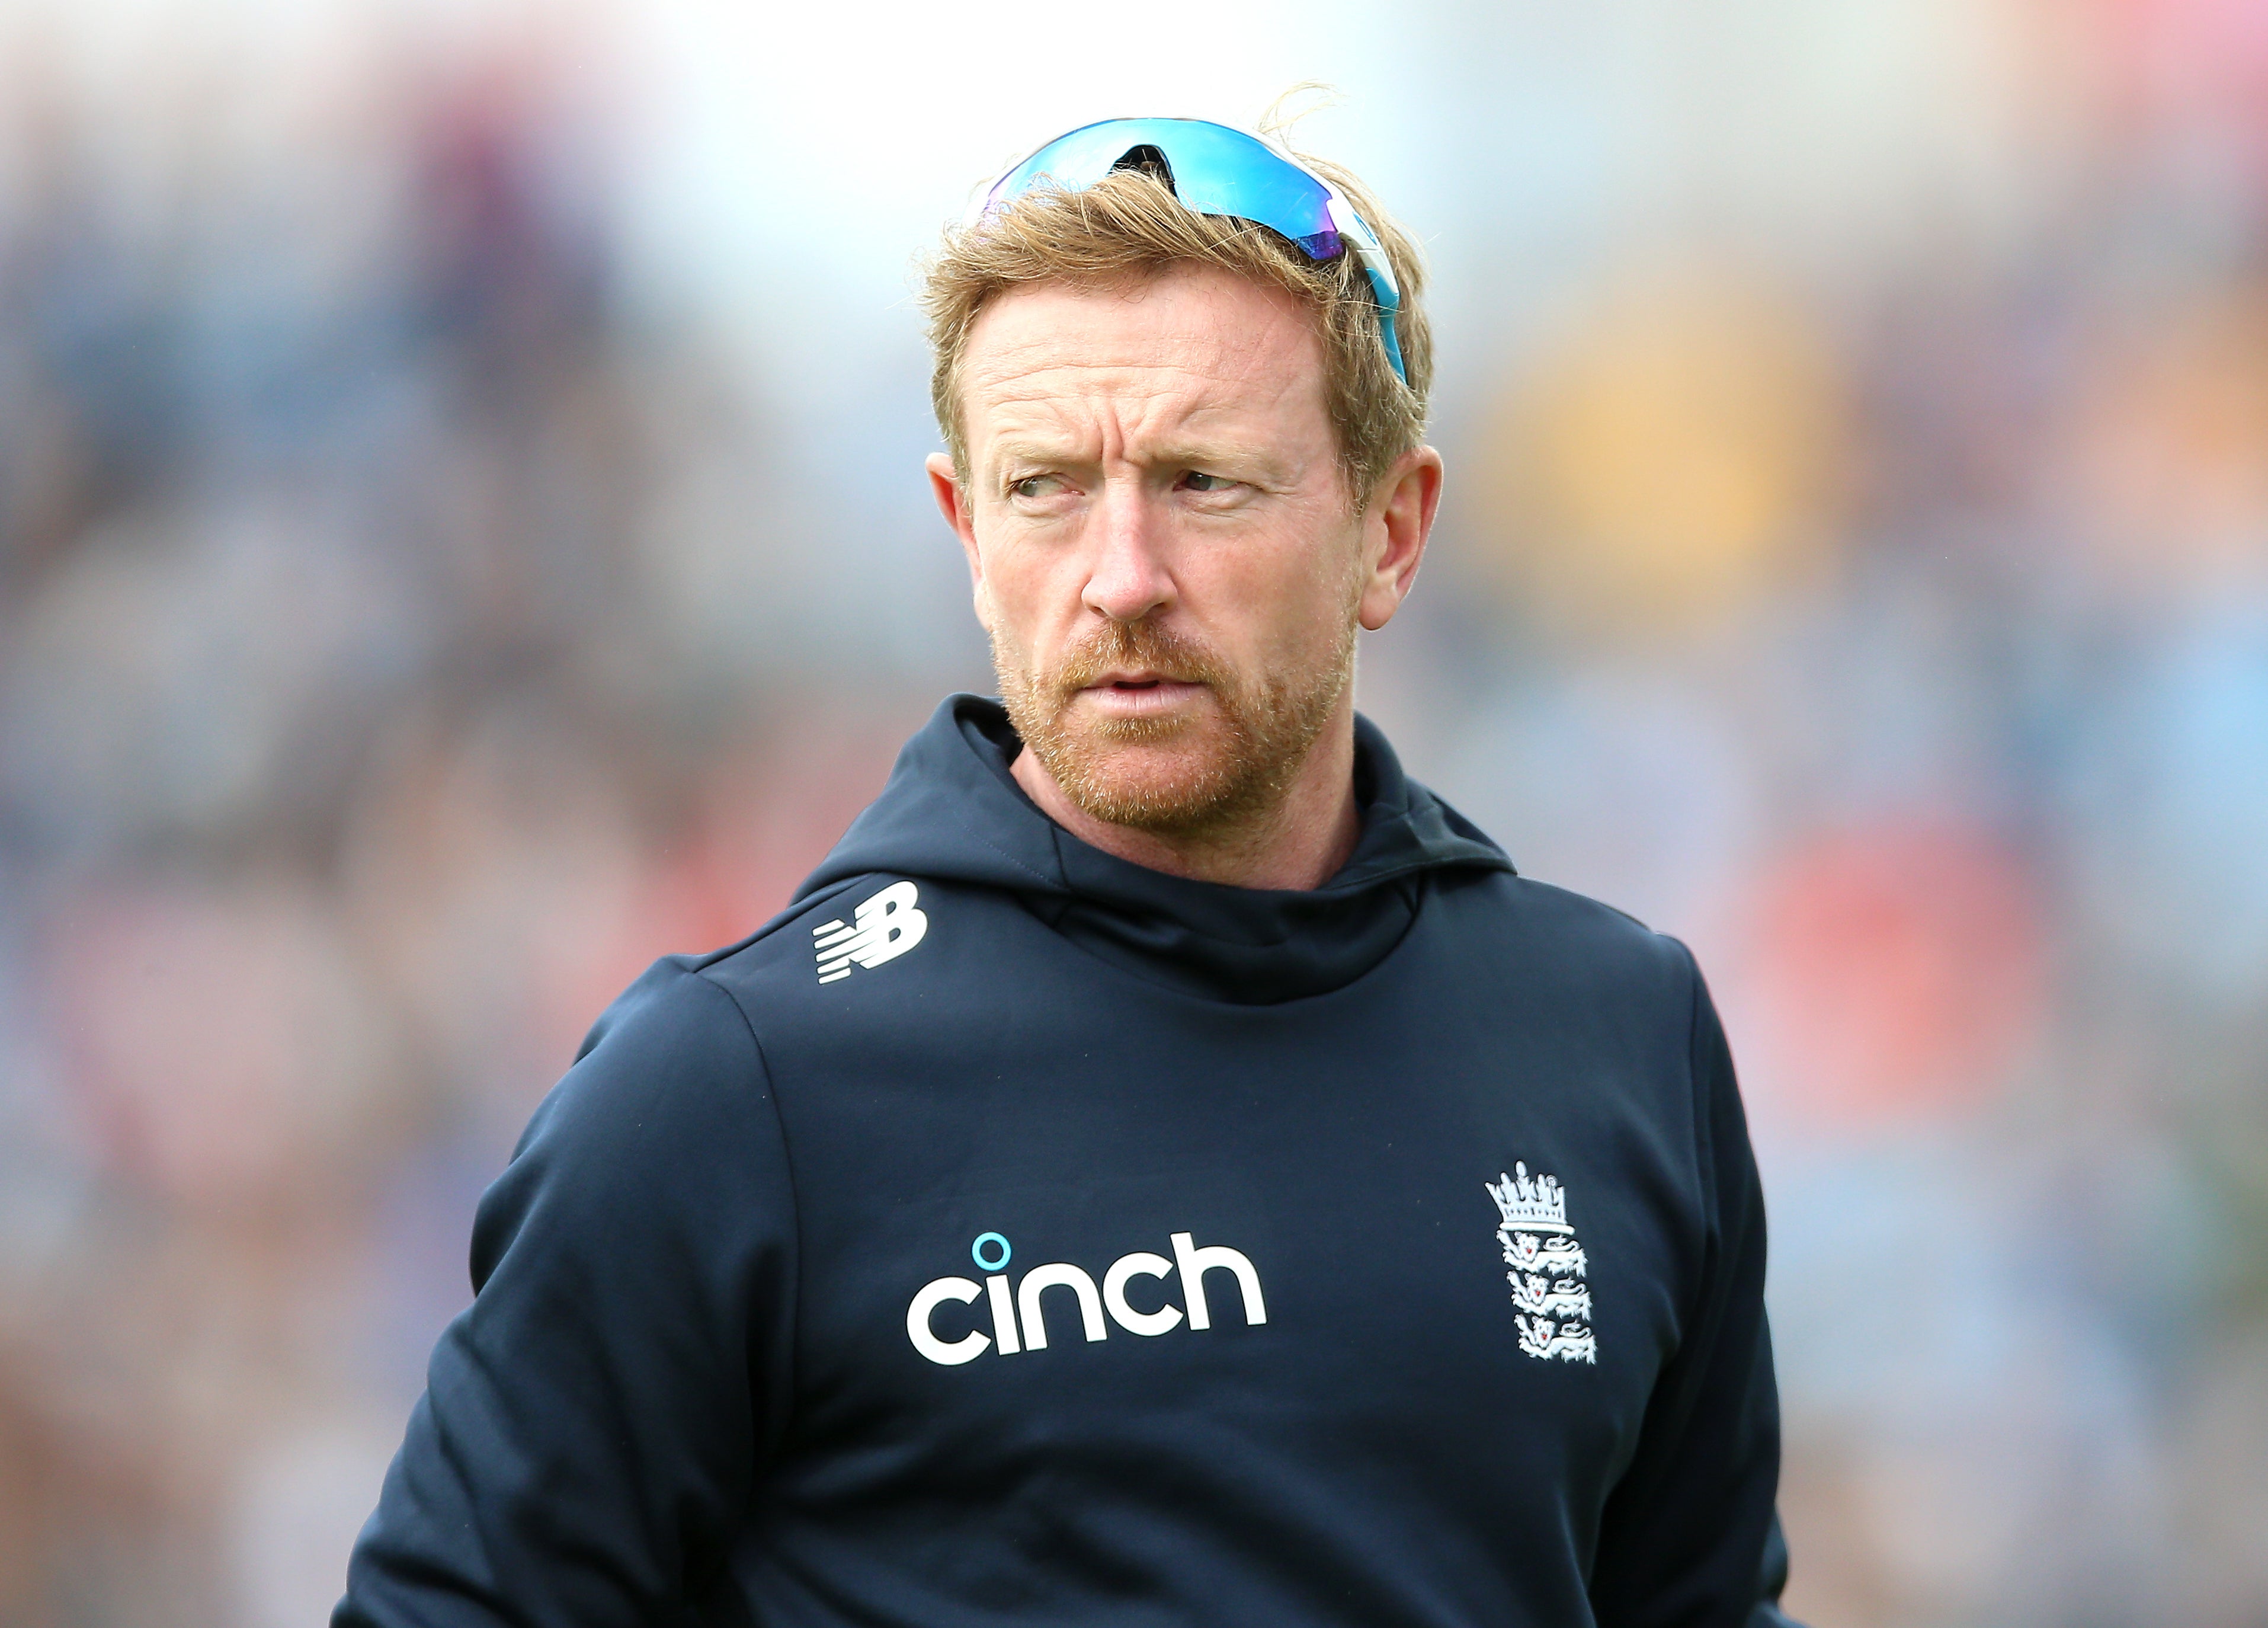 Paul Collingwood hopes to be involved in England’s new coaching set-up (PA)